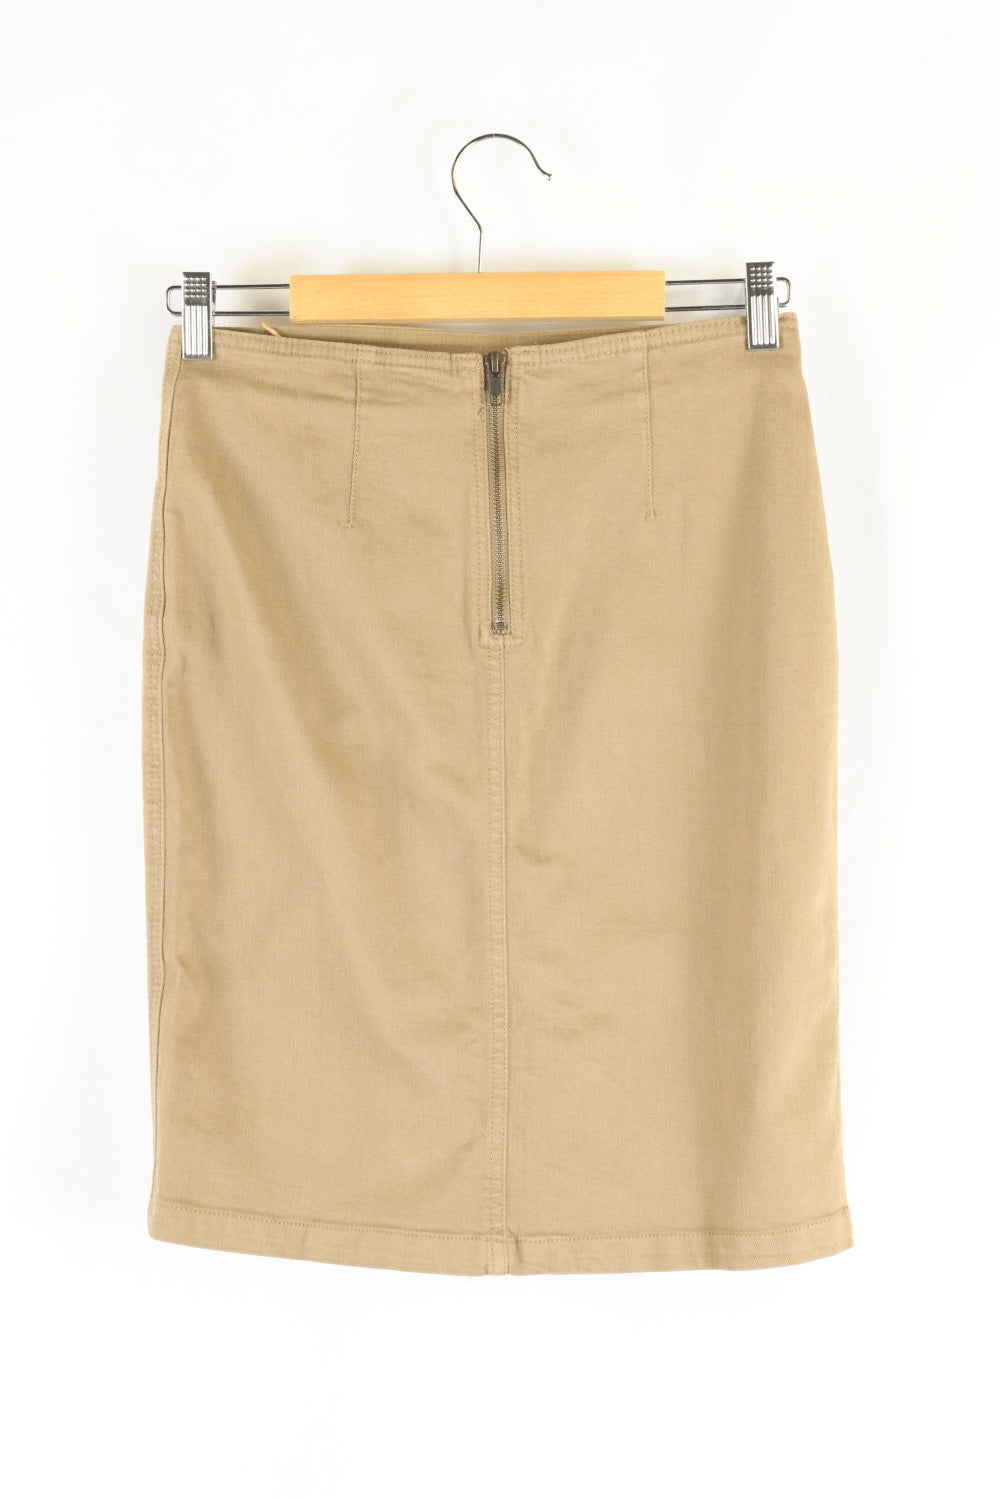 Country Road Brown Skirt 4